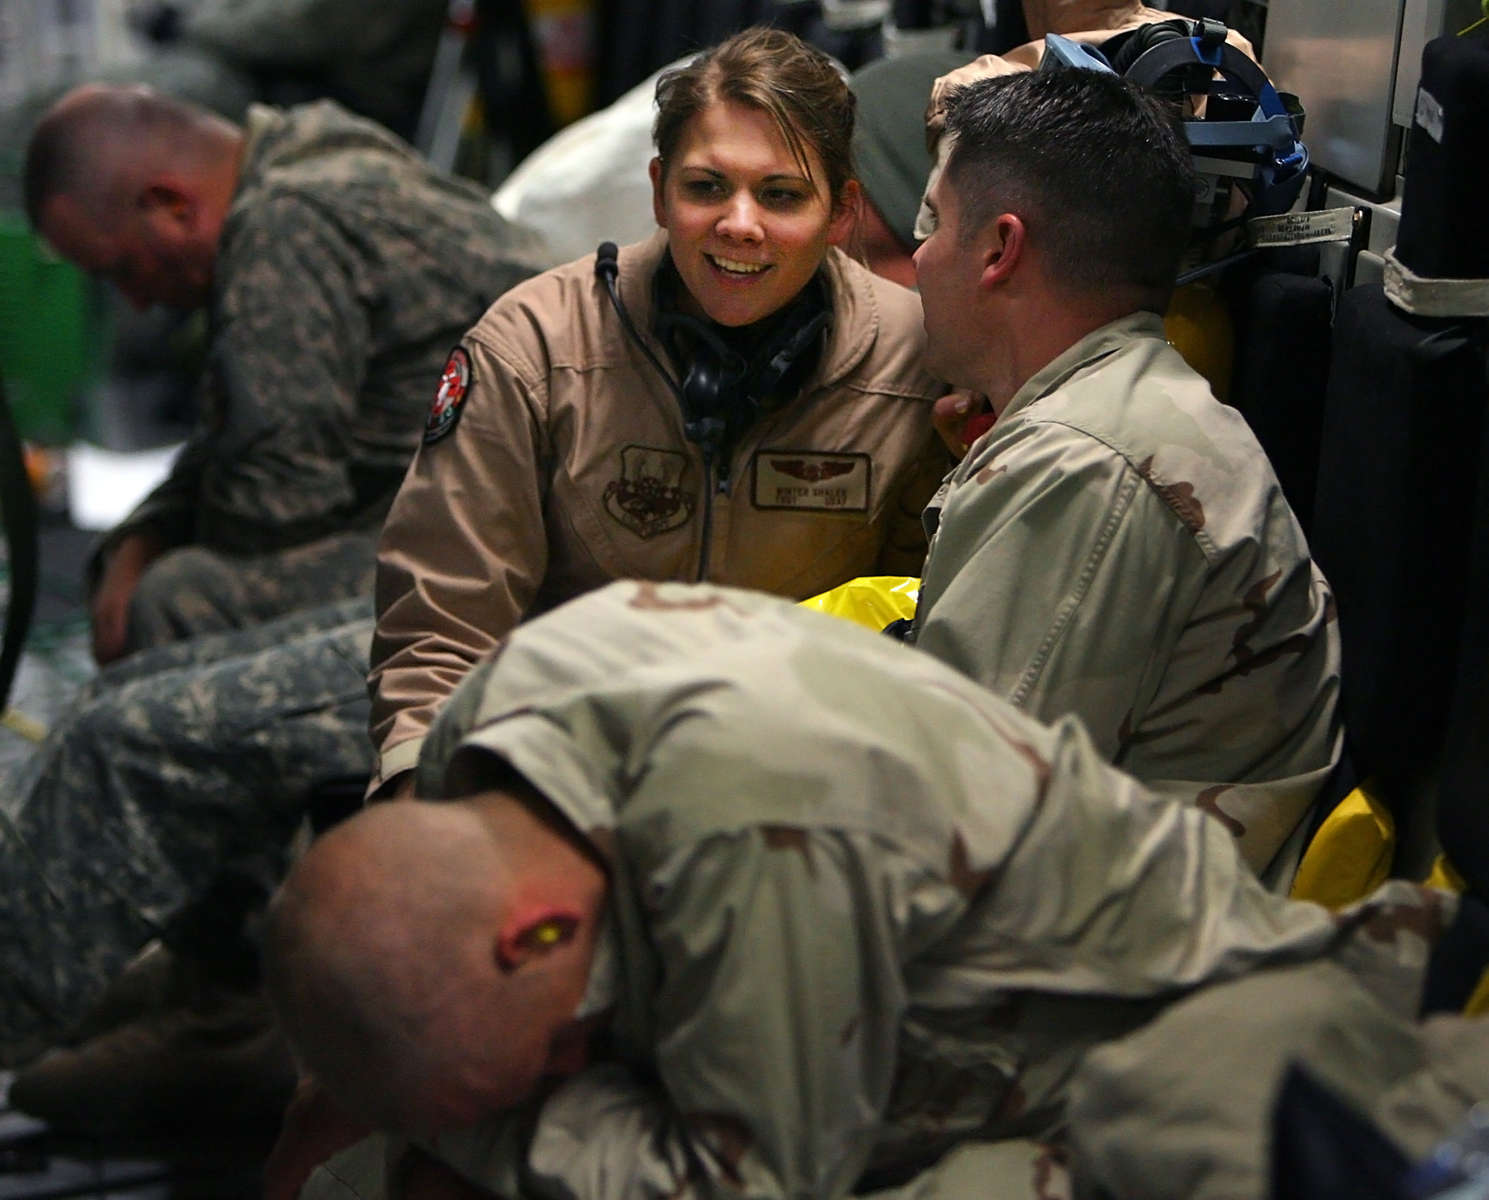 Minneapolis Air Reserve Station medical technician Winter Shaler takes time to talk during the flight with military personnel who were injured in Afghanistanand are being flown to Ramstein Air Force Base in Germany for more medical care. (The Press-Enterprise/ Mark Zaleski)